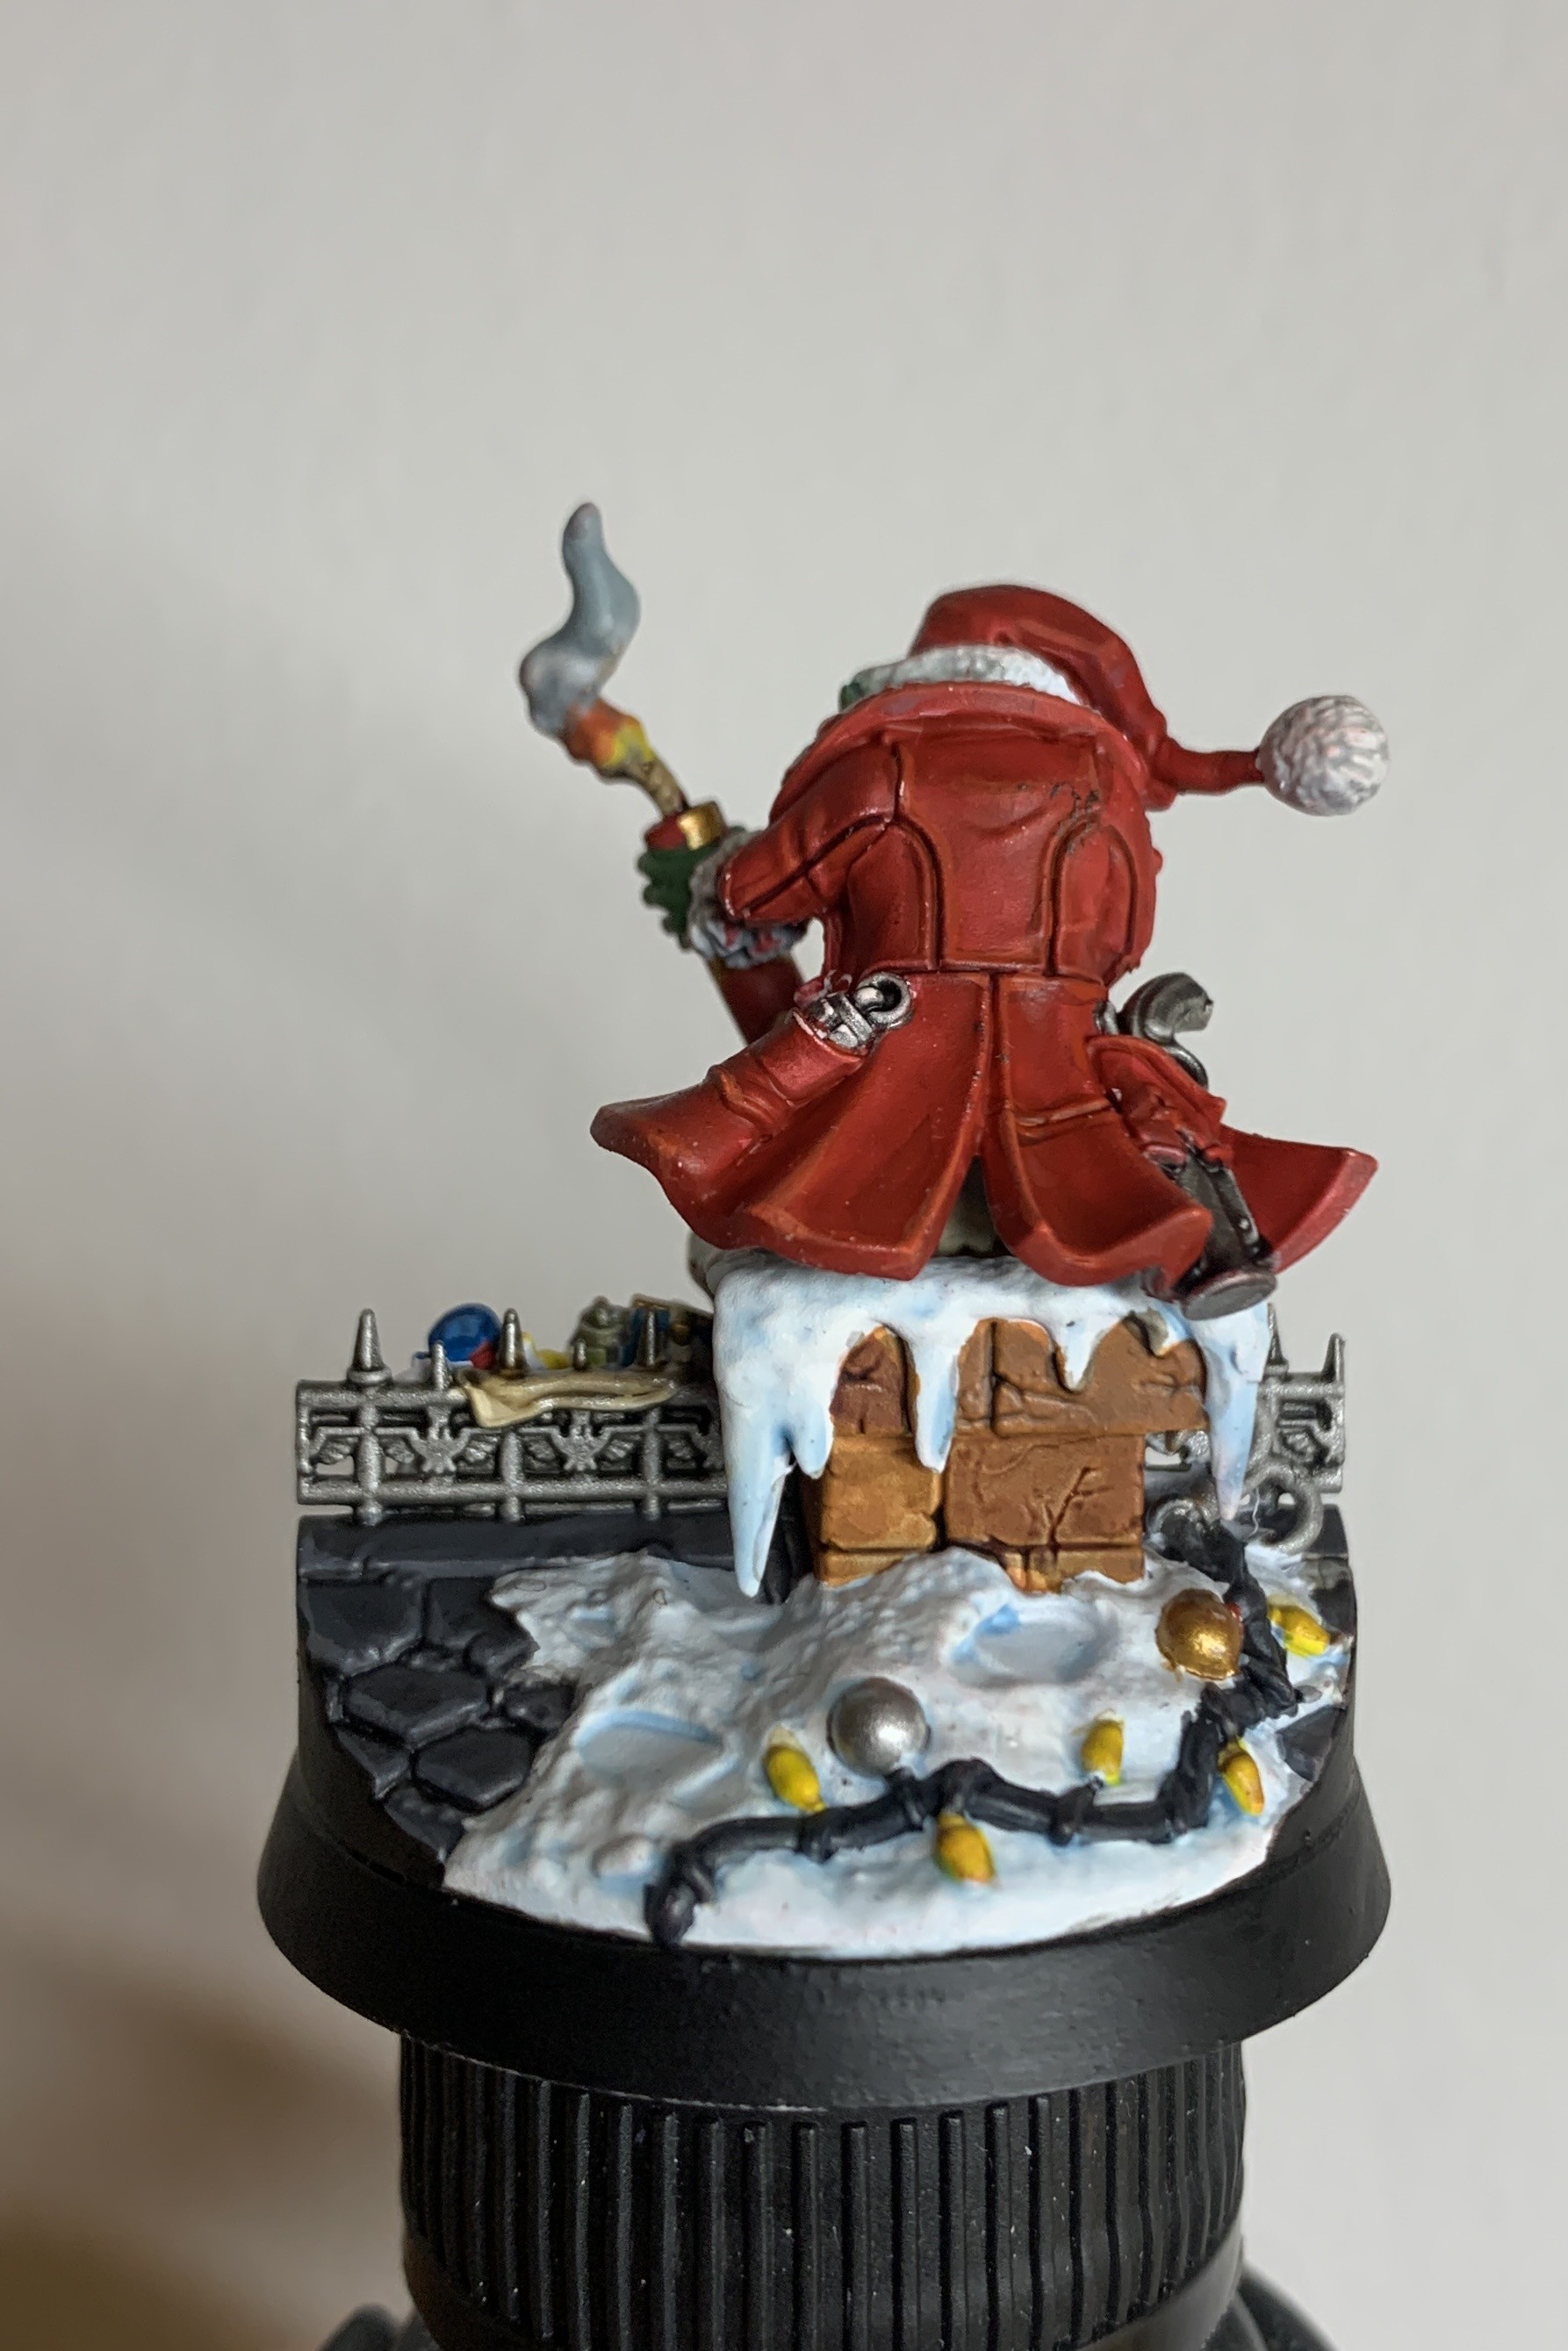 Back of an Ork in a red Christmas outfit standing over a chimey. The Oak is holding an explosive. Next to the chimney is roof slates and a throwing line with an hook made out of a string of Christmas lights